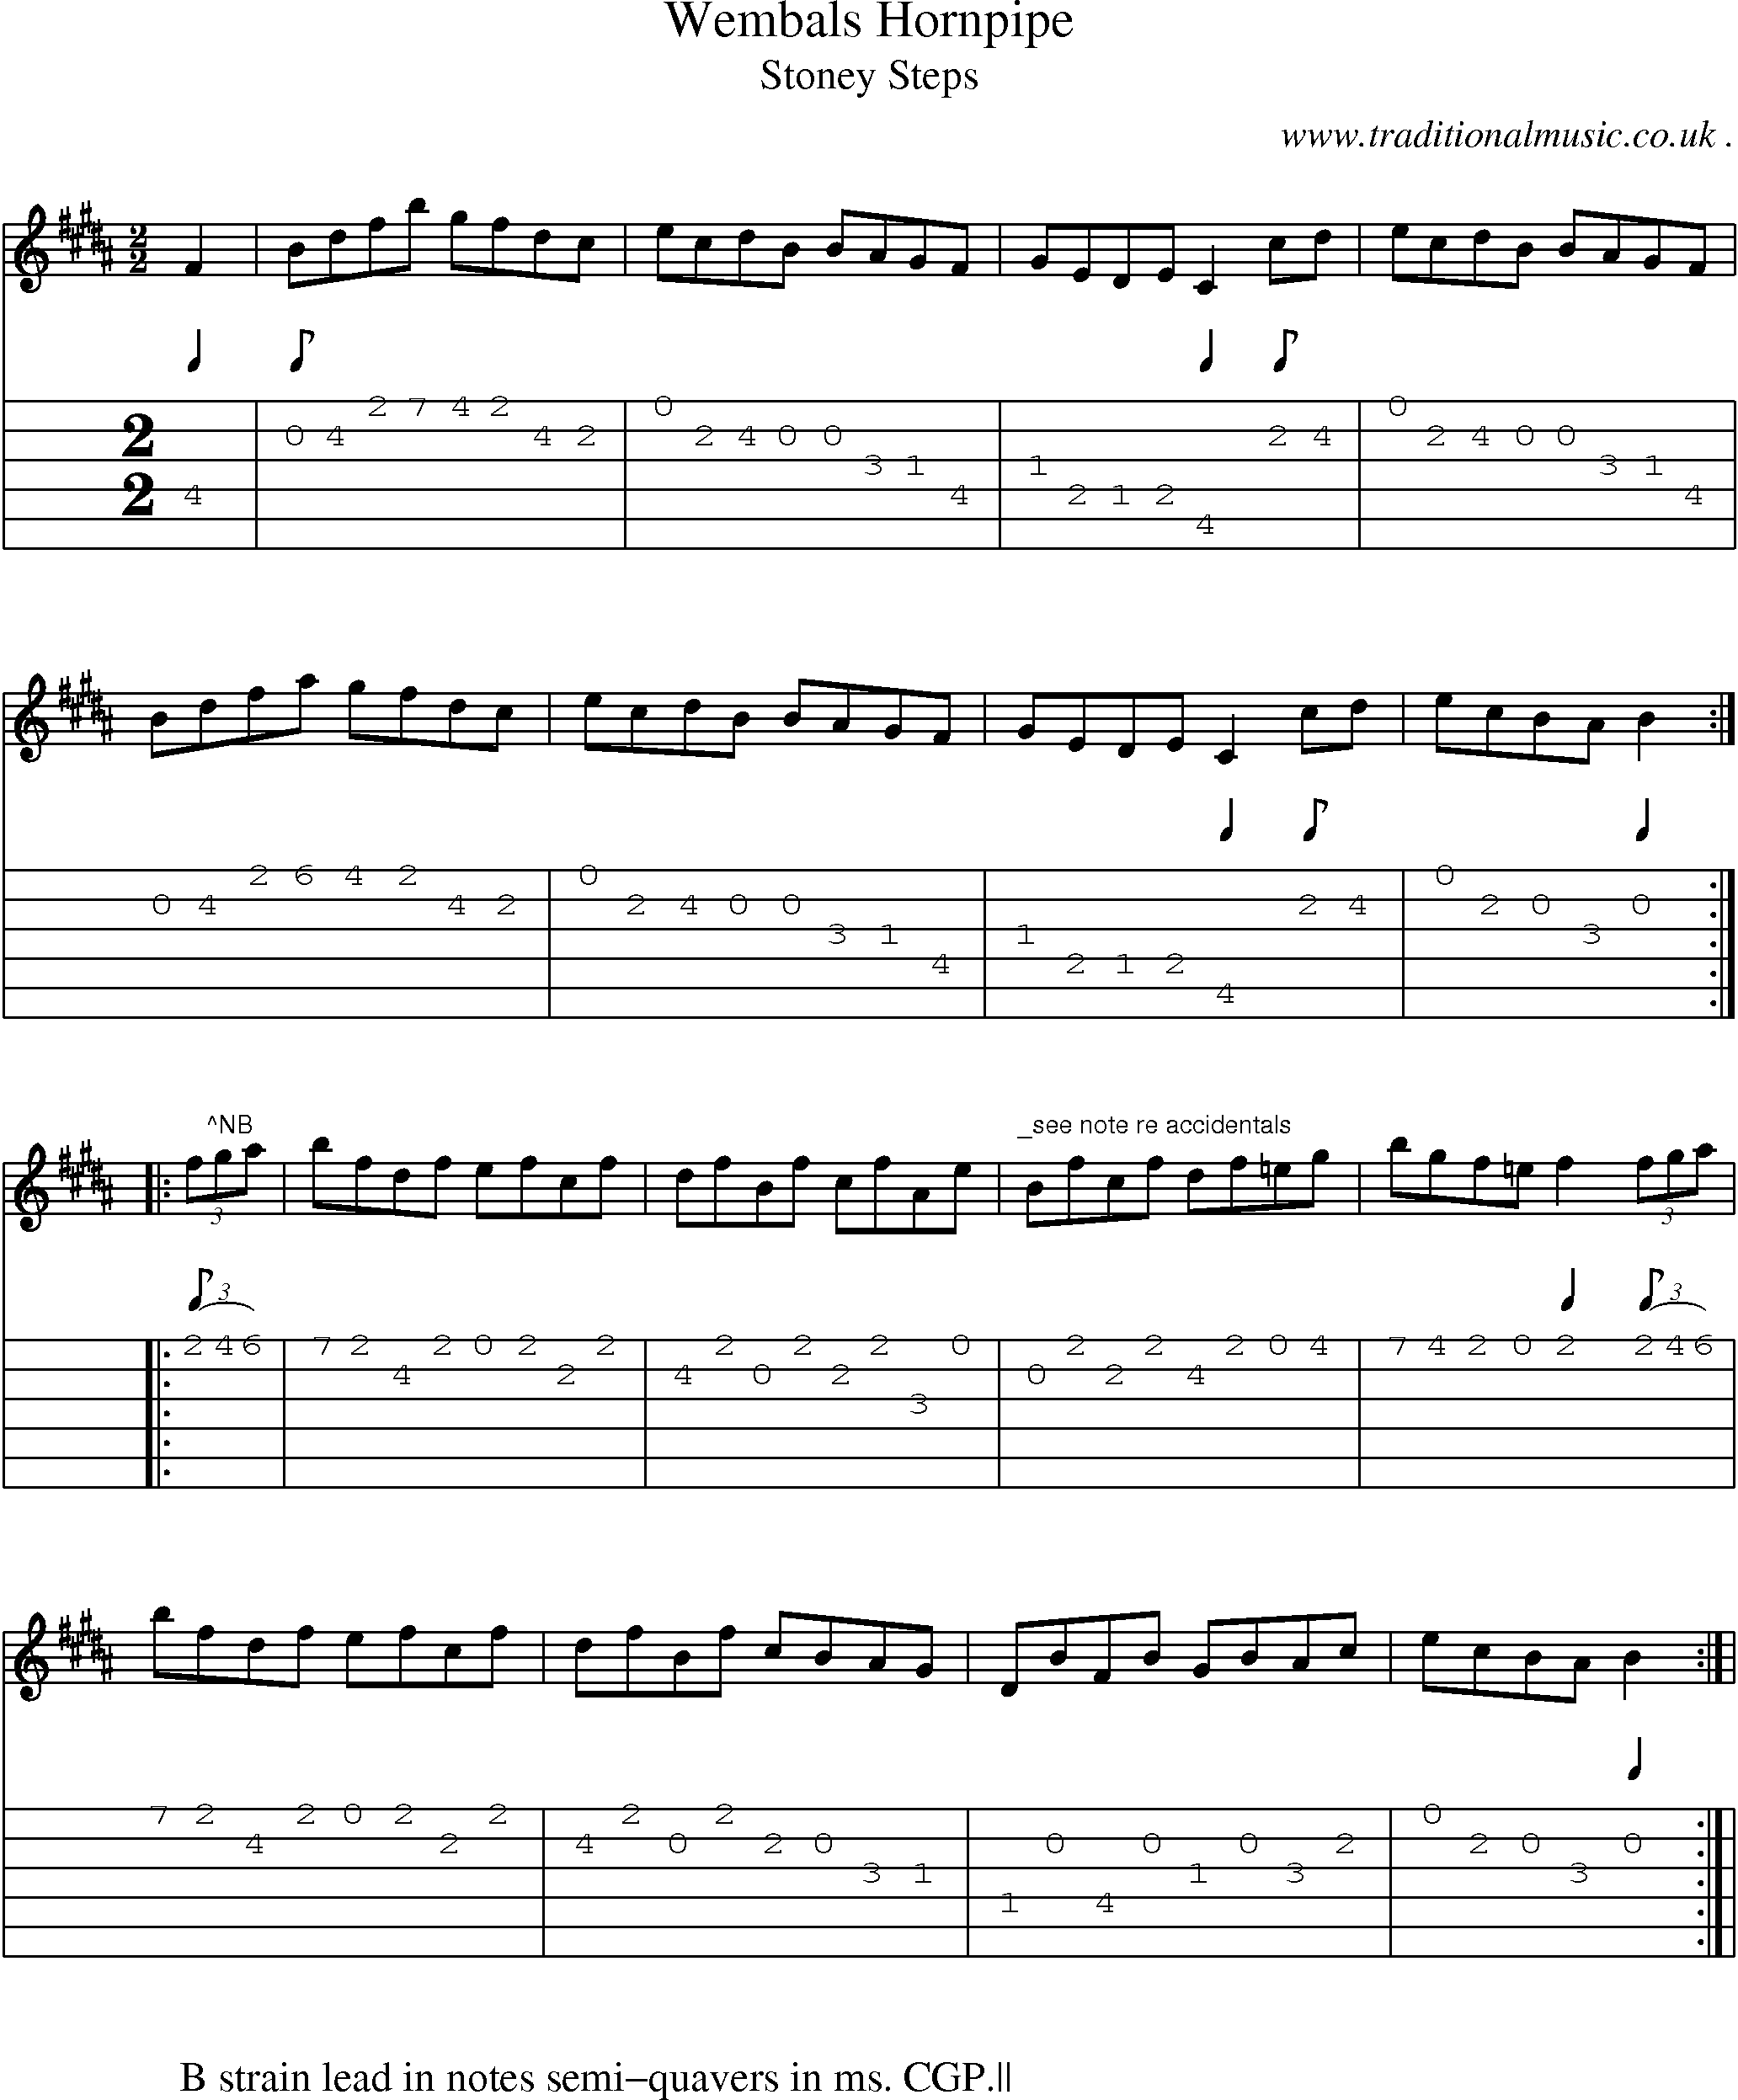 Sheet-Music and Guitar Tabs for Wembals Hornpipe